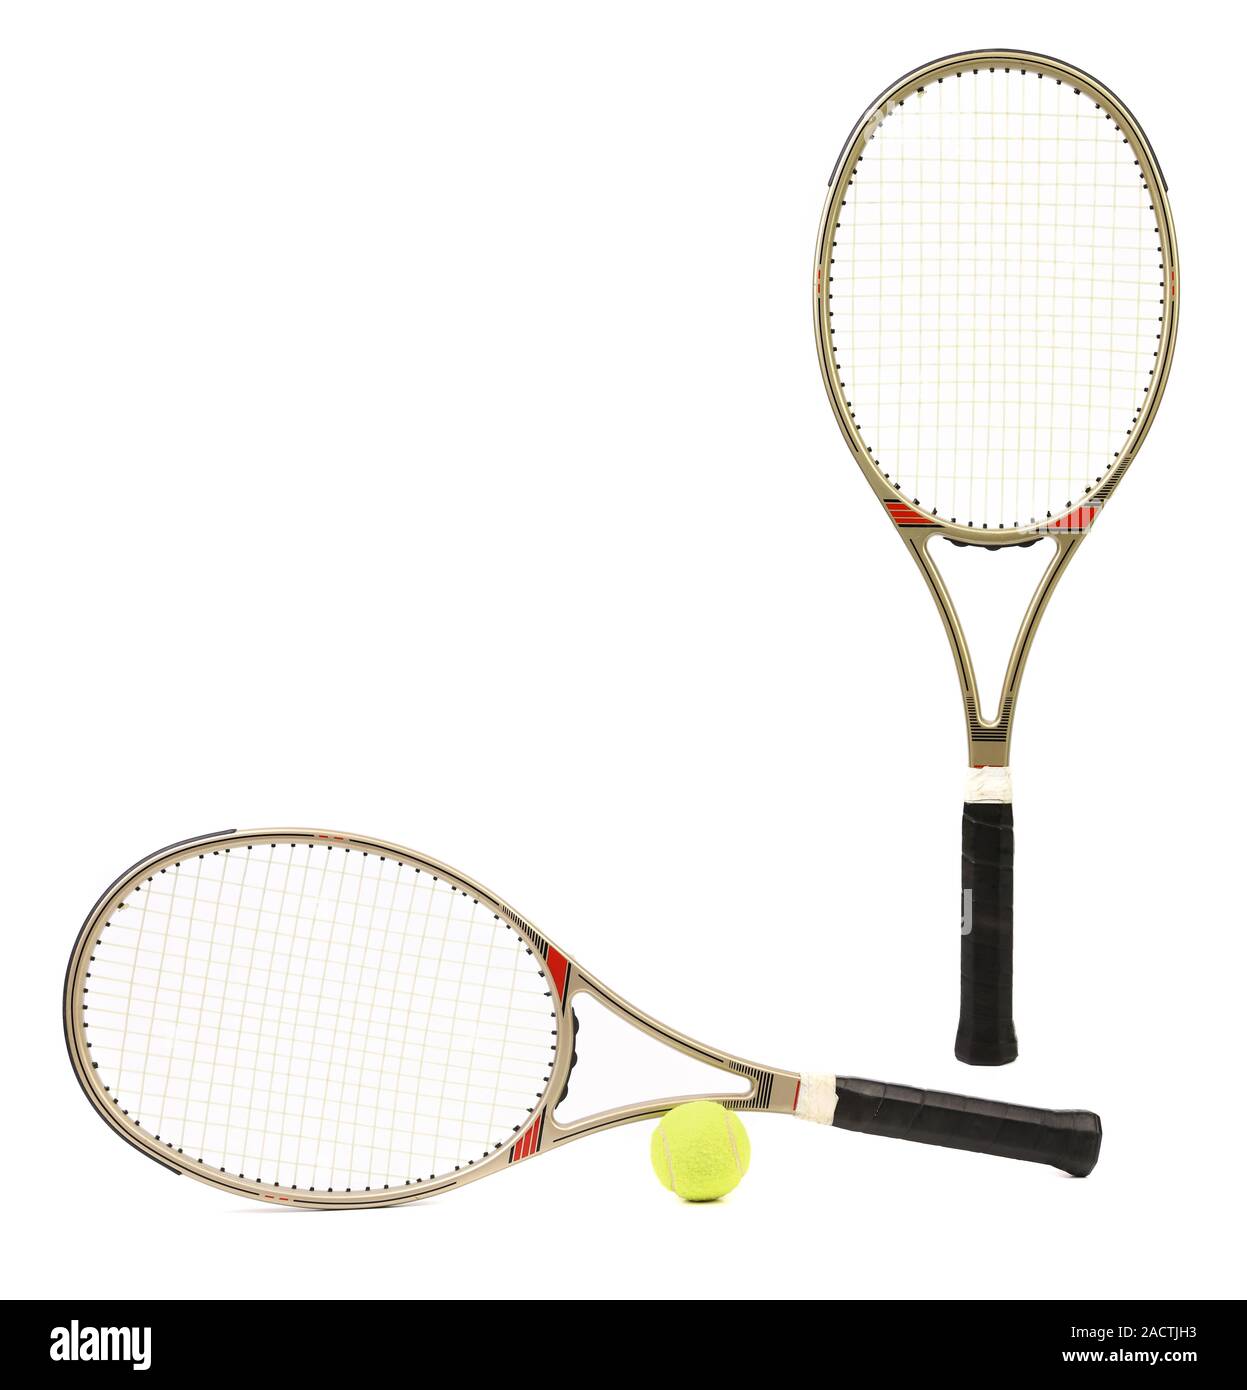 Two sport tennis rackets and yellow ball. Stock Photo